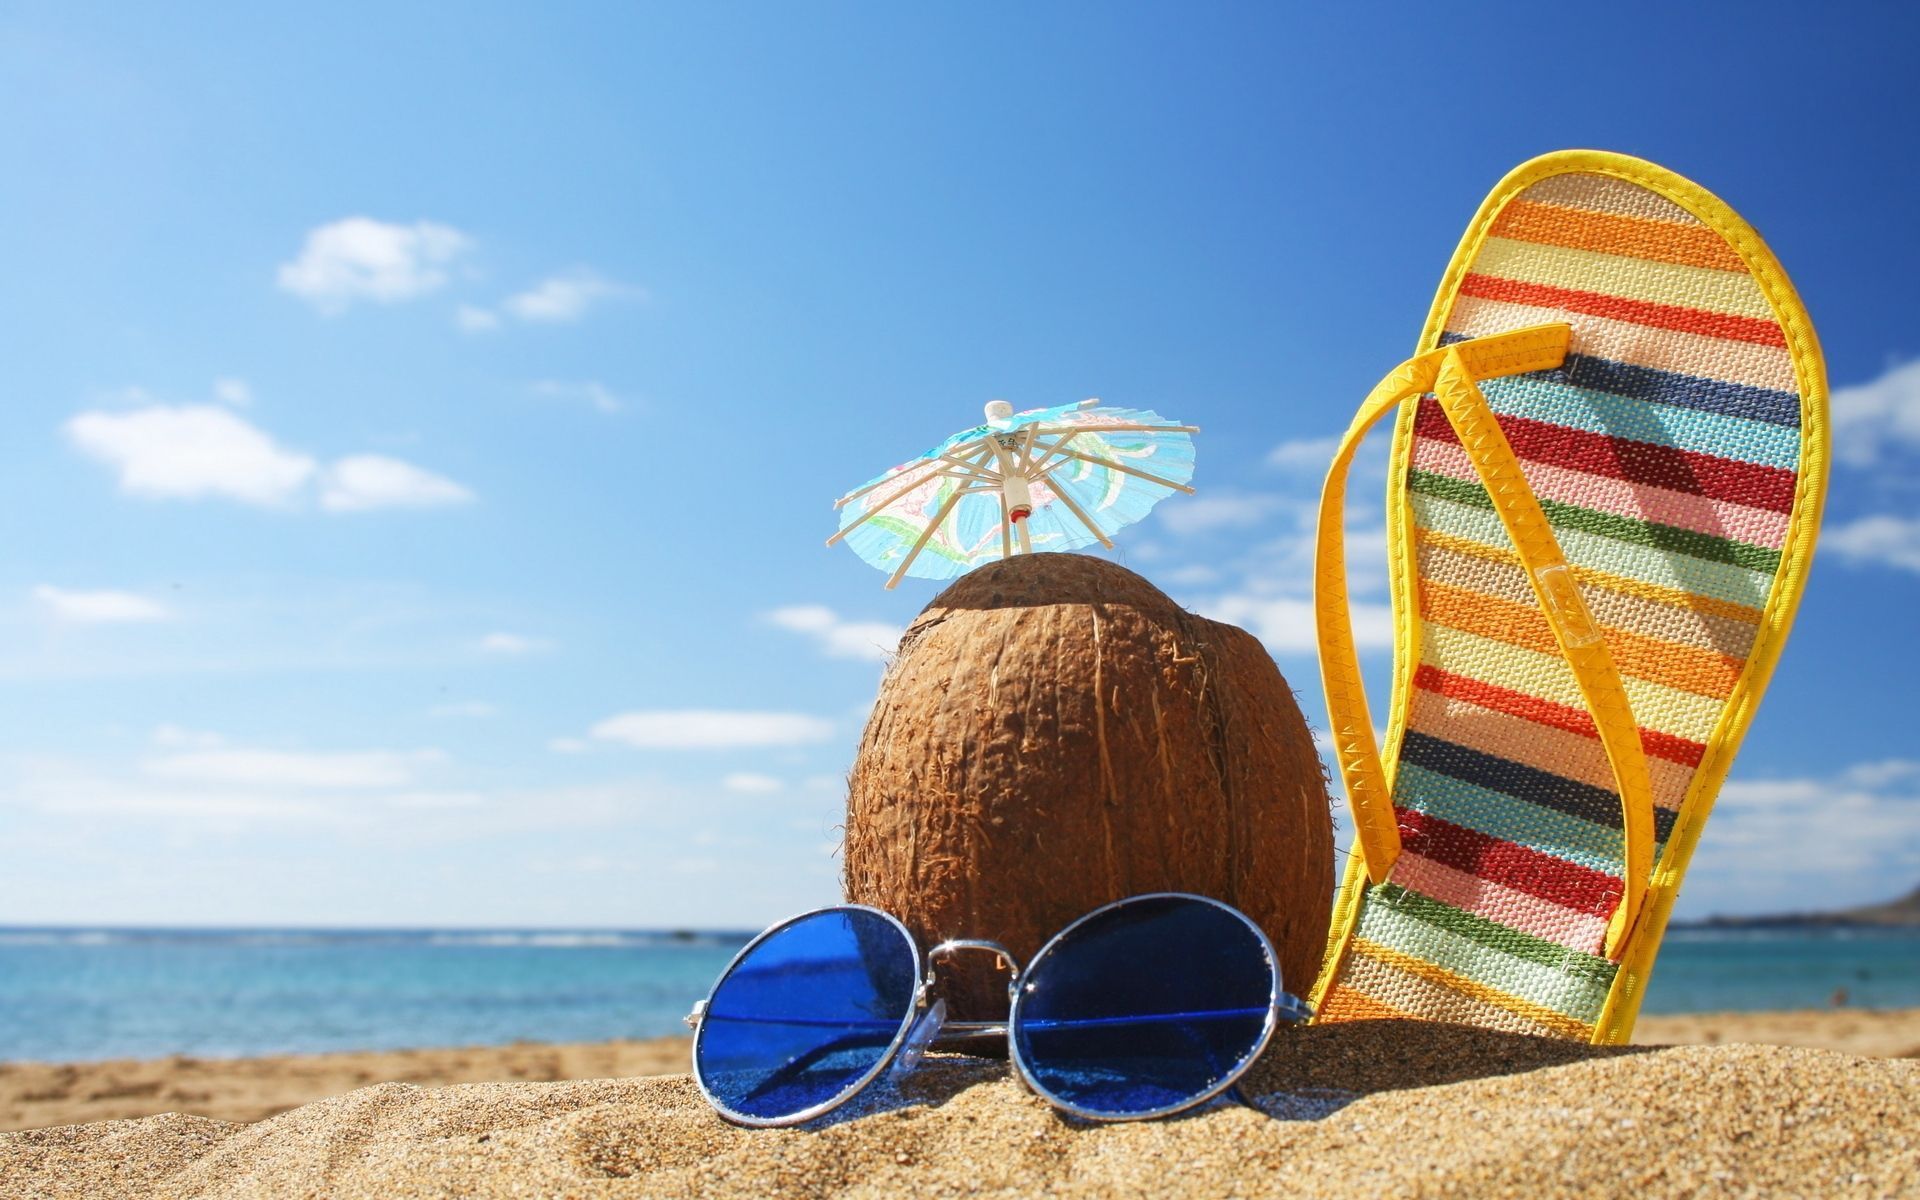 Summer Background Images 13918 - HD Wallpapers Site